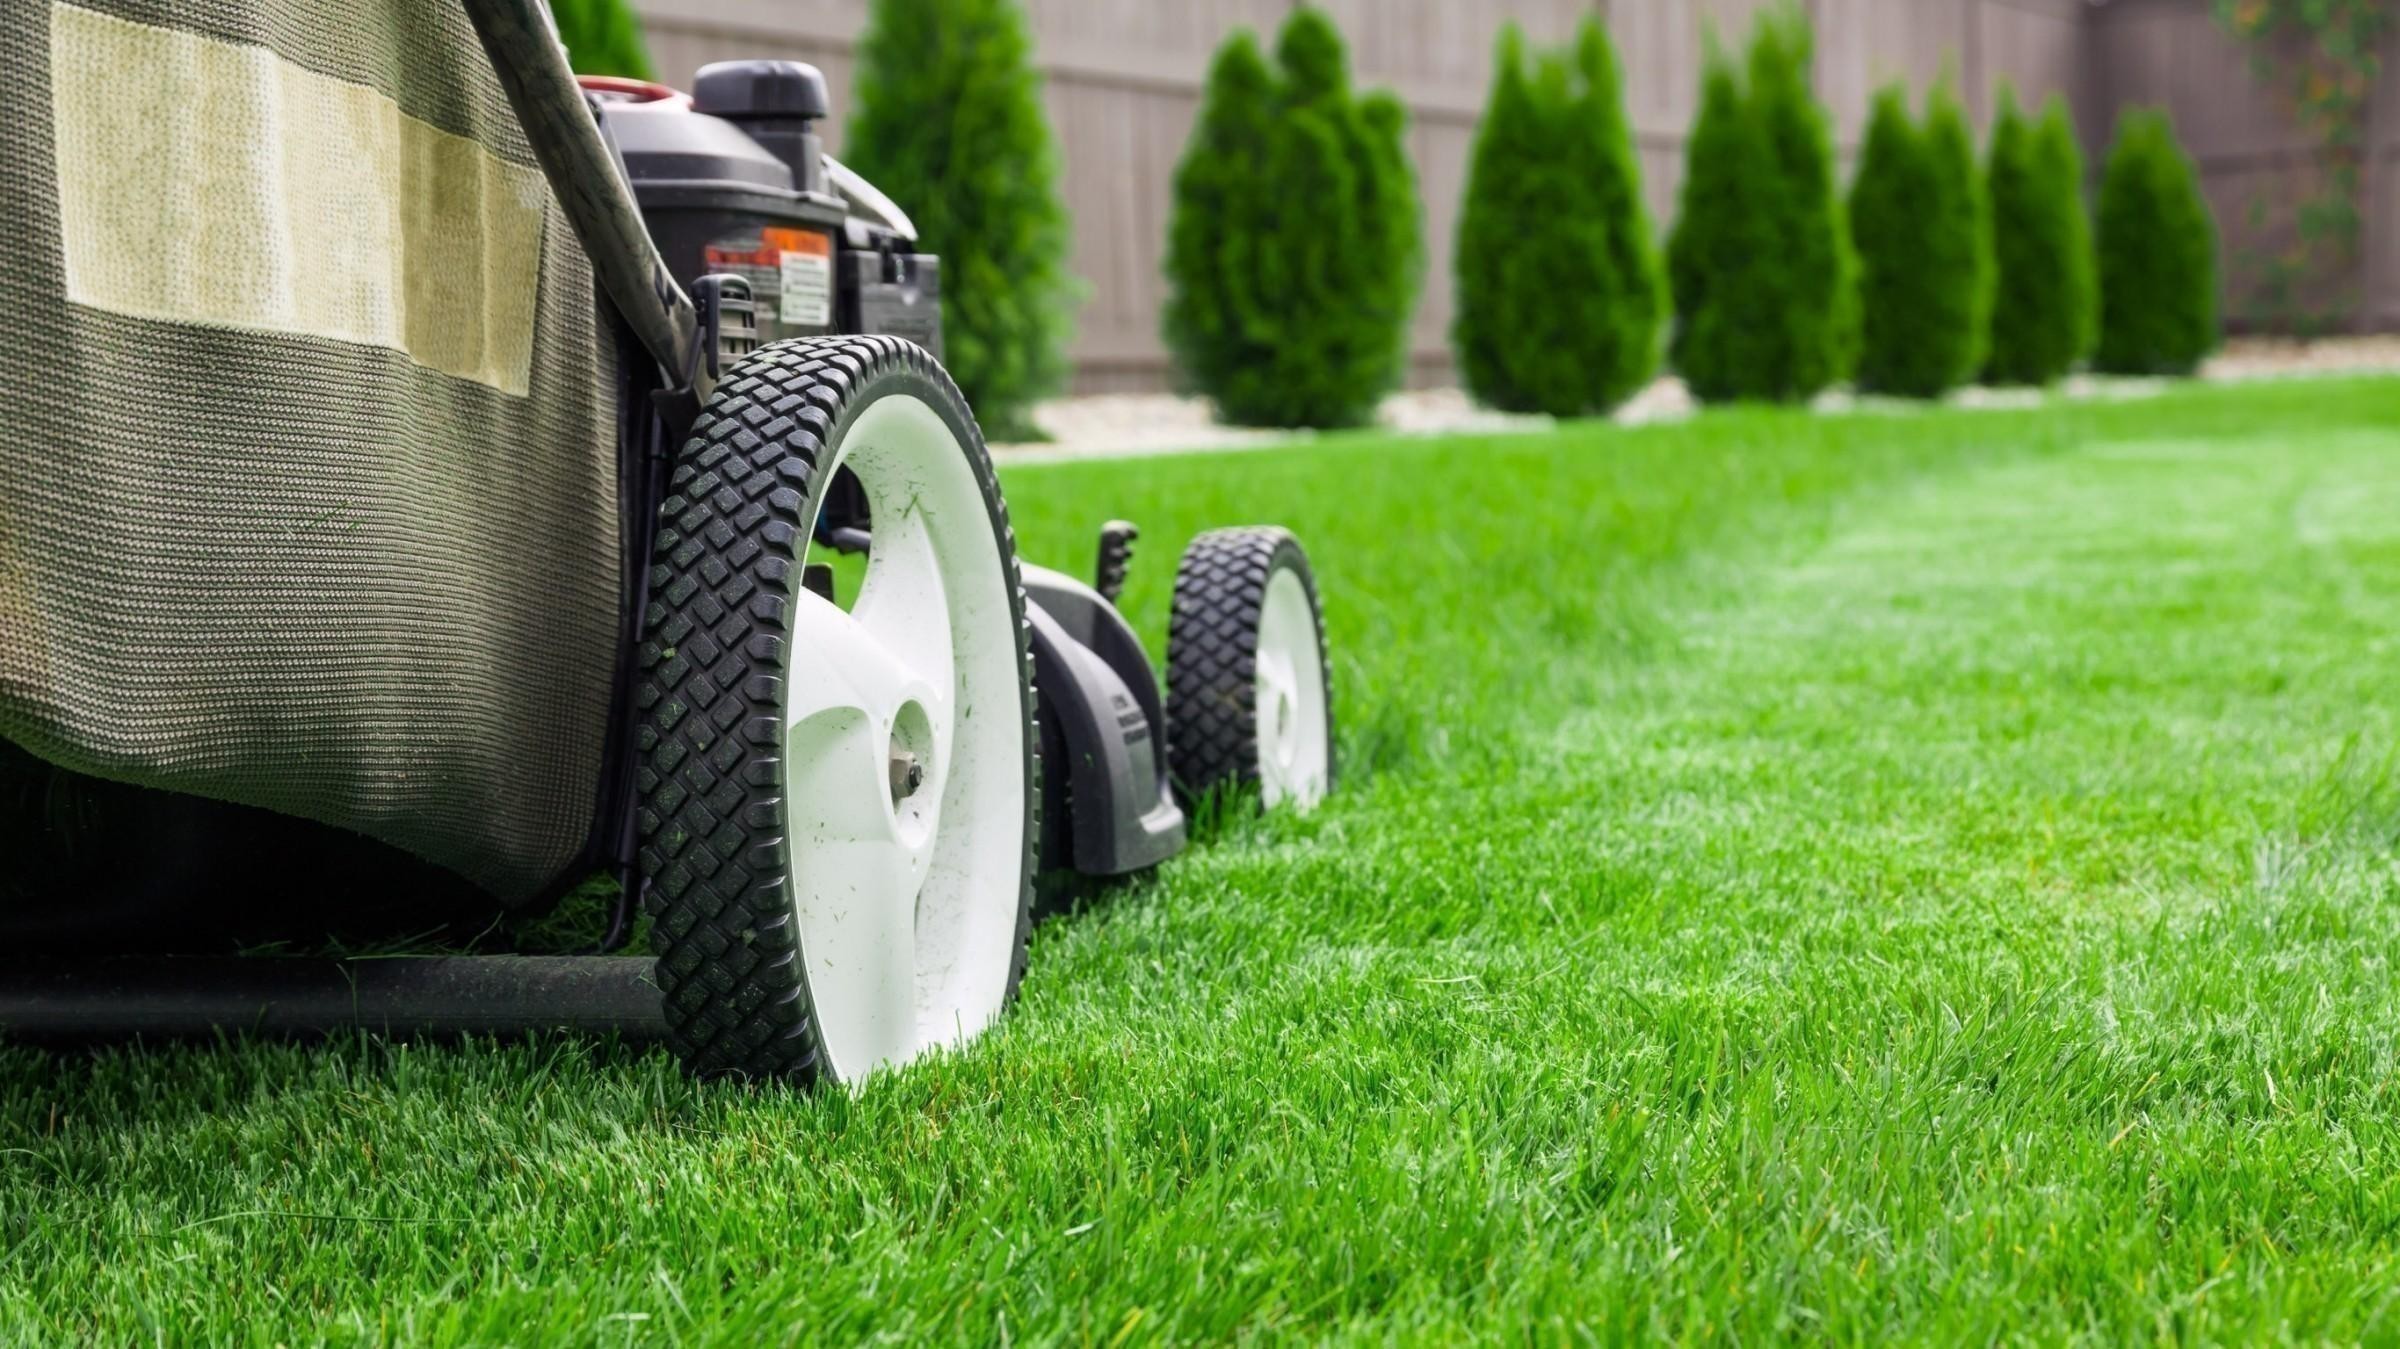 Lawnmowing and Gardening Franchise - New...Business For Sale